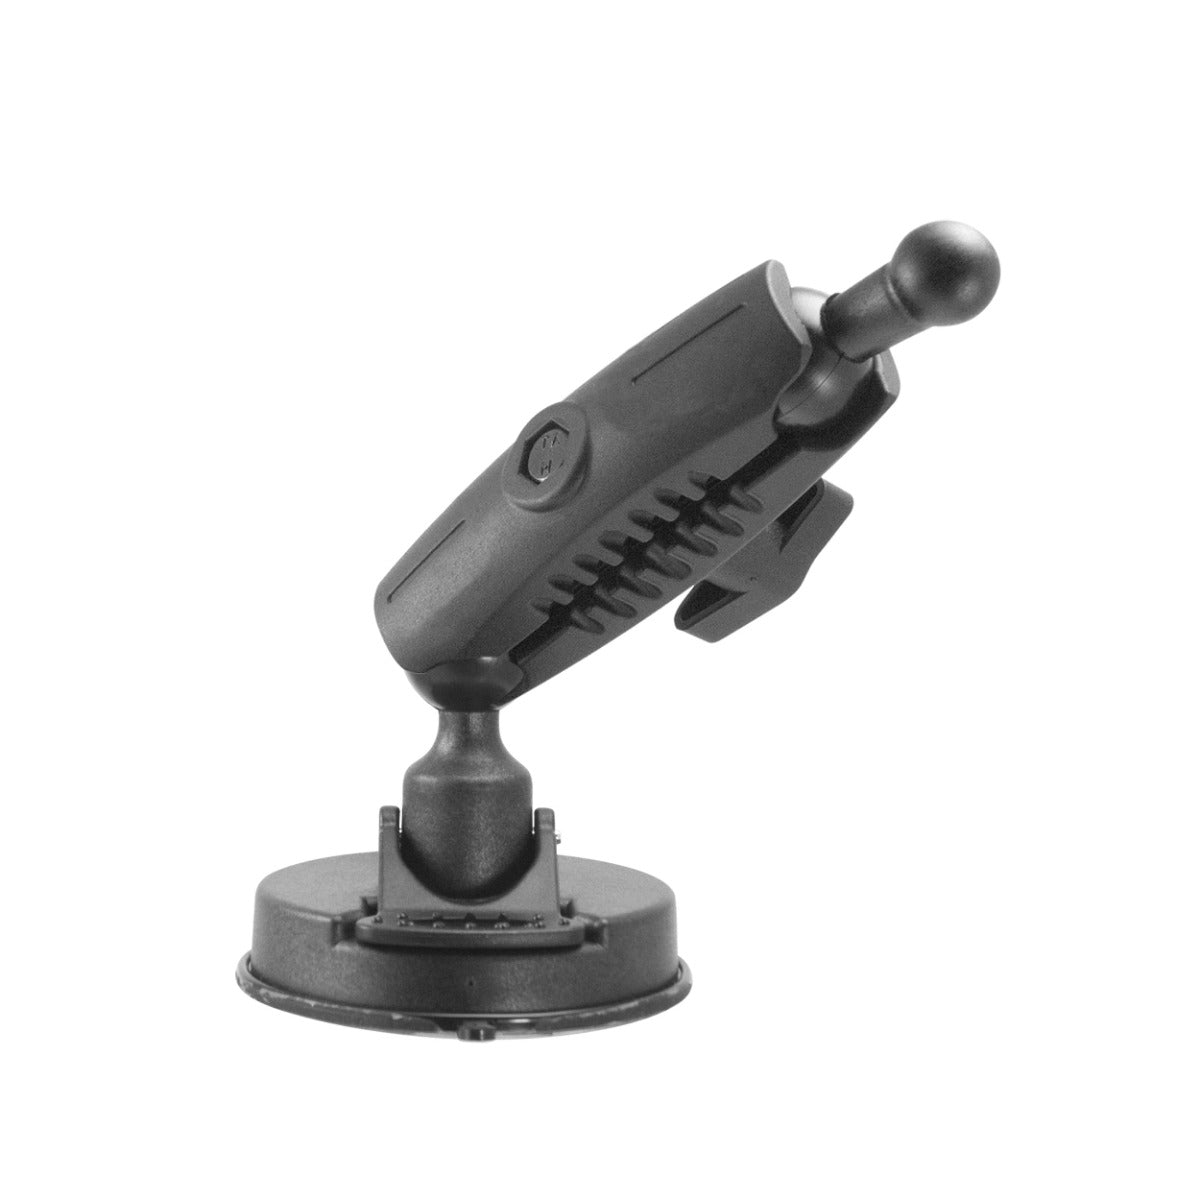 iBOLT 17mm Dual Ball to “Sticky” Suction Cup Mount Base compatible w/ Garmin GPS and iBOLT Phone Holders